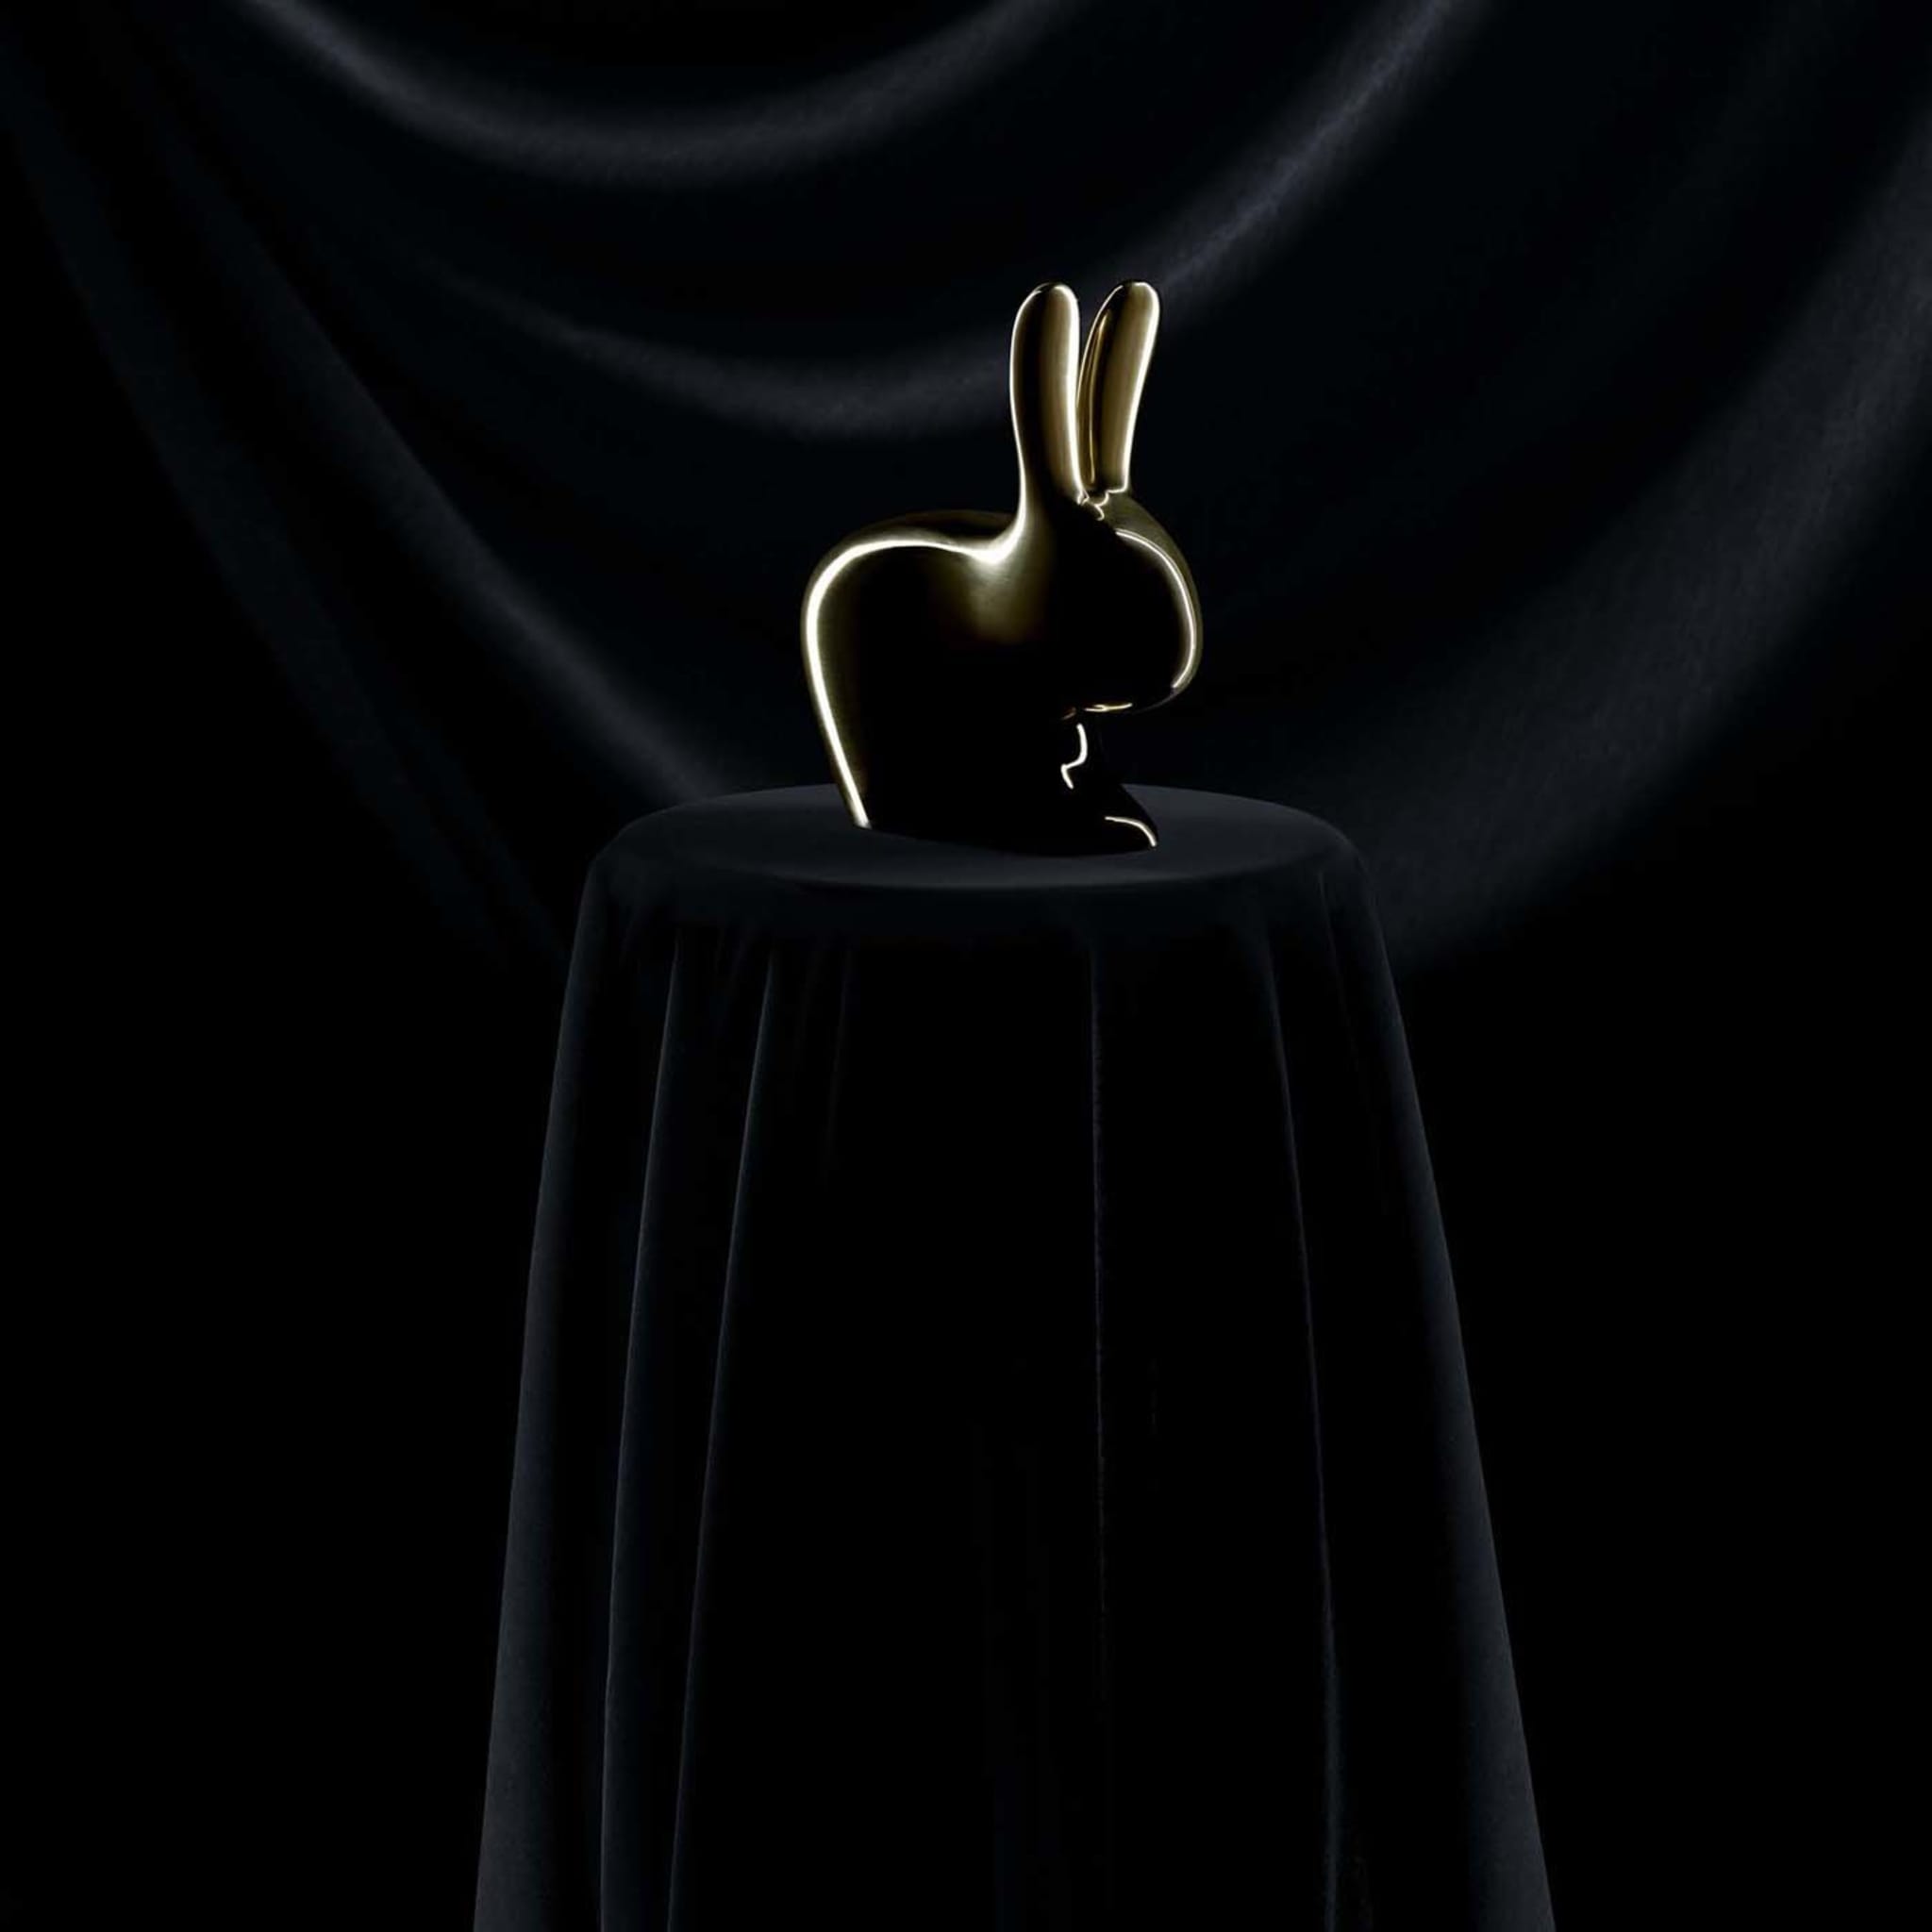 Rabbit Doorstop in Polished Brass by Stefano Giovannoni - Alternative view 4